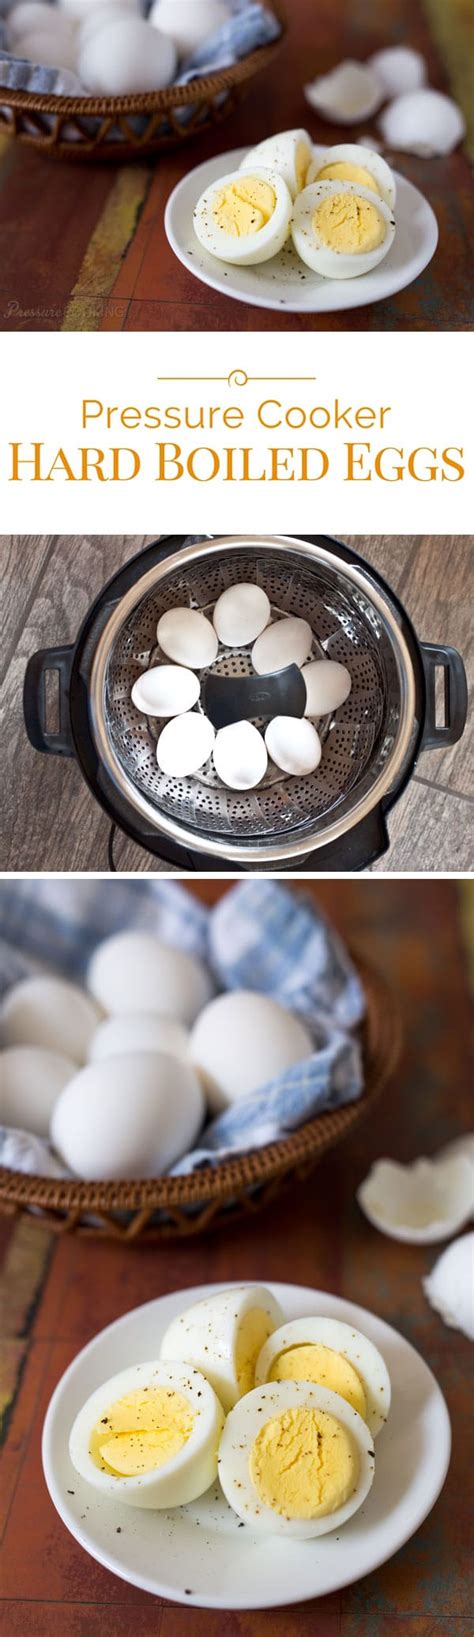 instant-pot-hard-boiled-eggs-pressure-cooking-today image